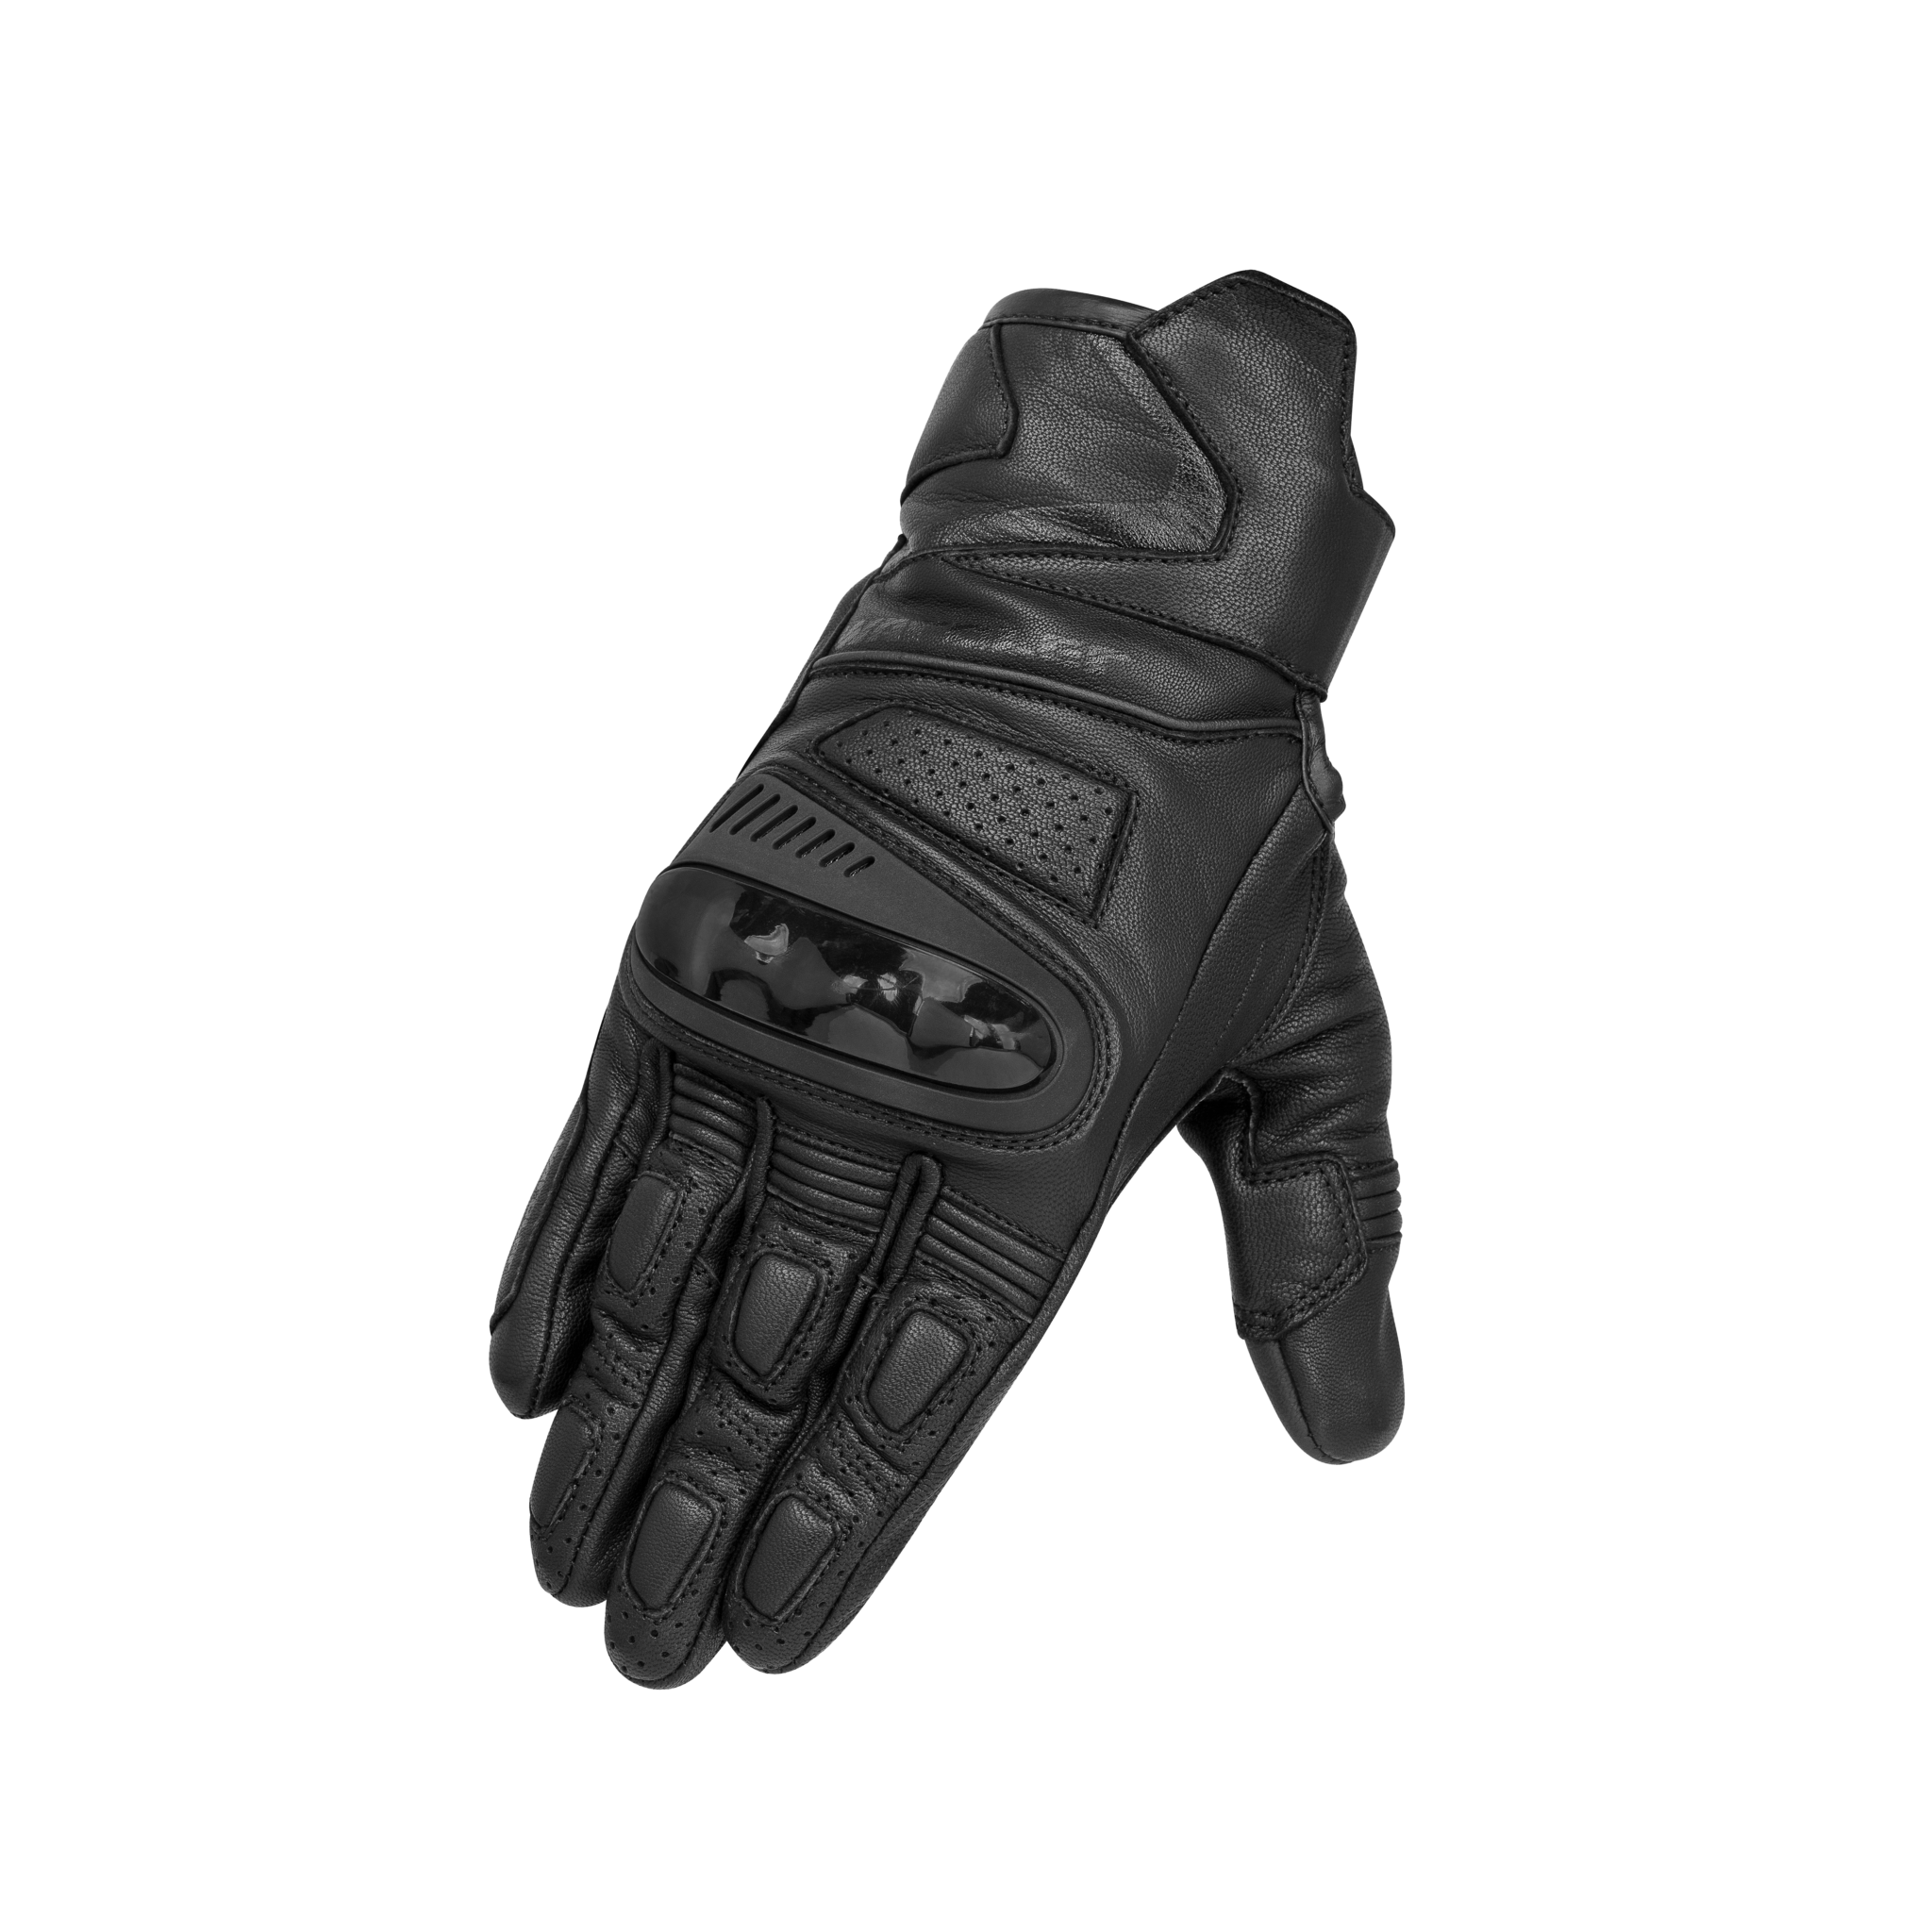 Vortex Motorcycle gloves, TPU protection, breathable, black front